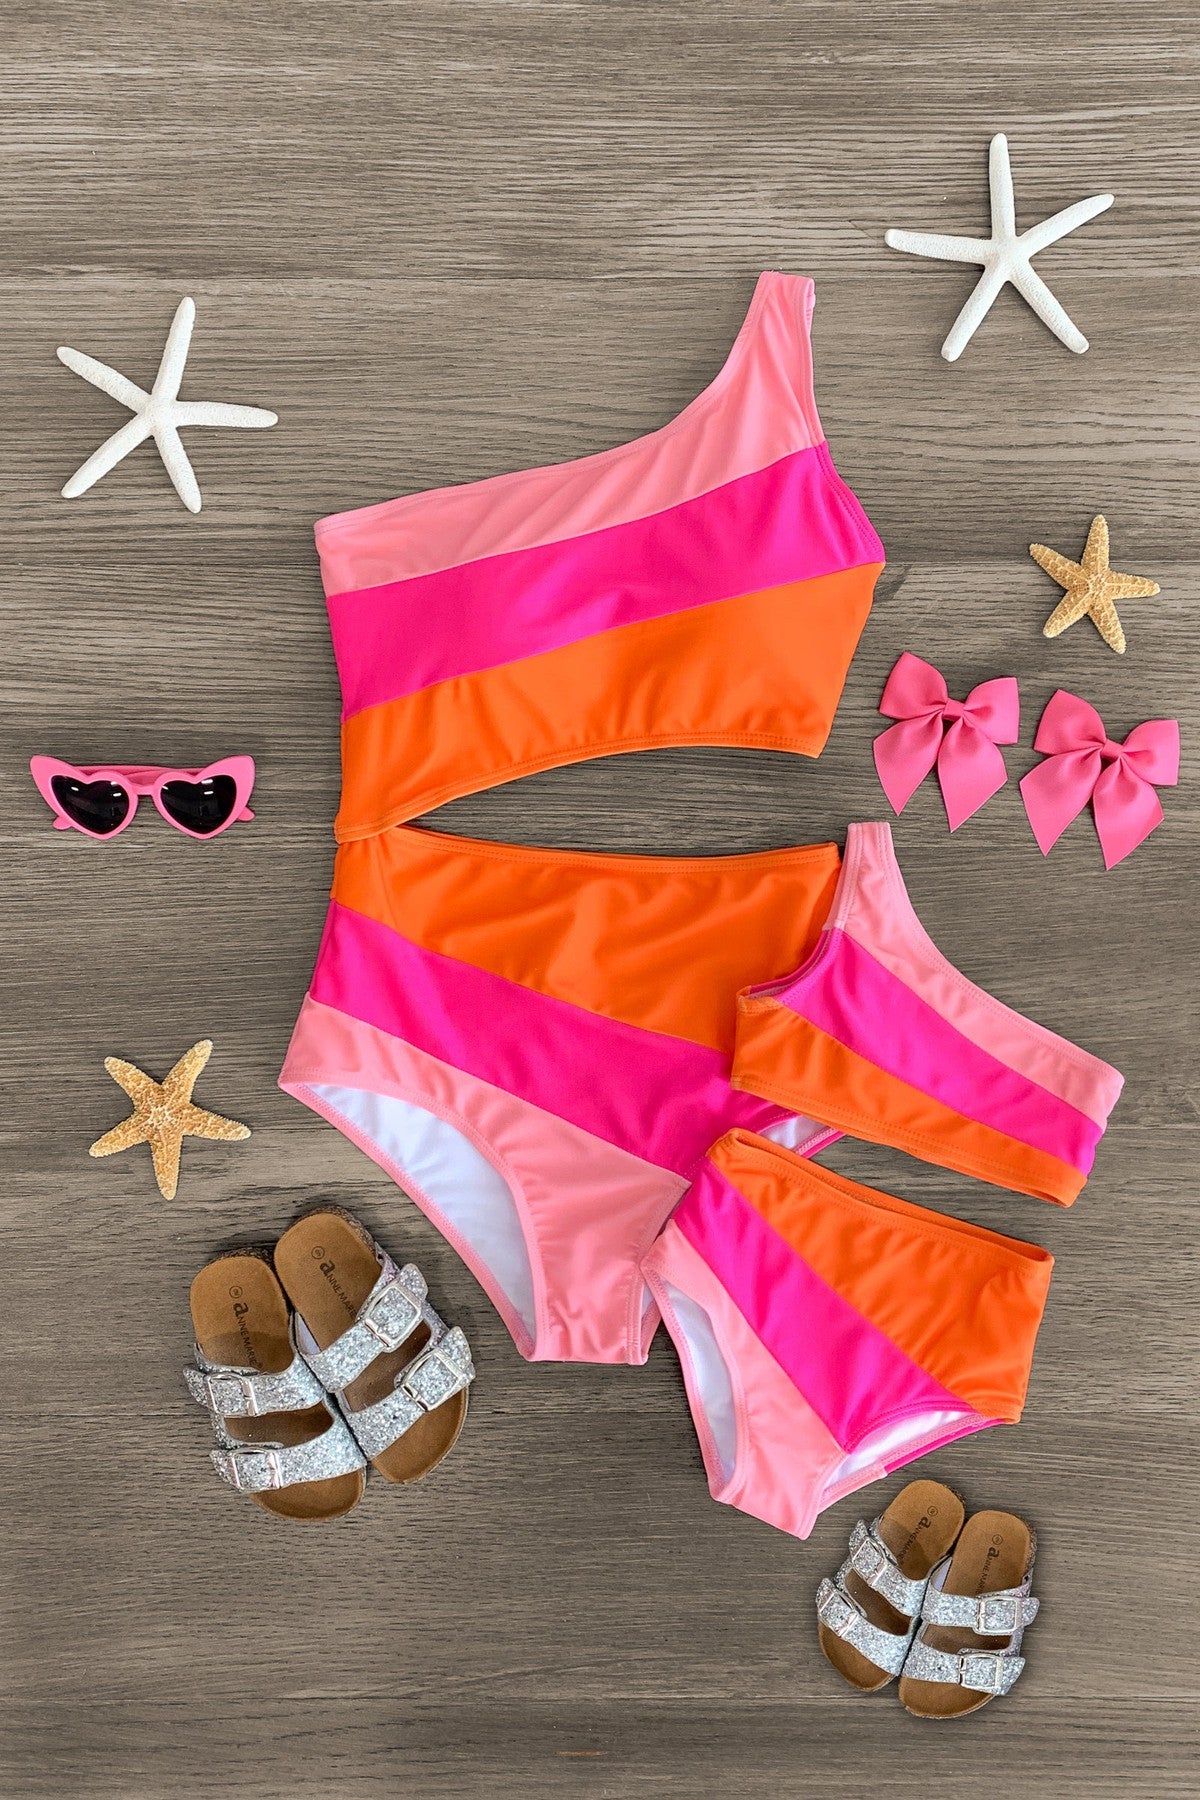 Mom & Me - Pink & Orange Striped Swimsuit - Sparkle in Pink